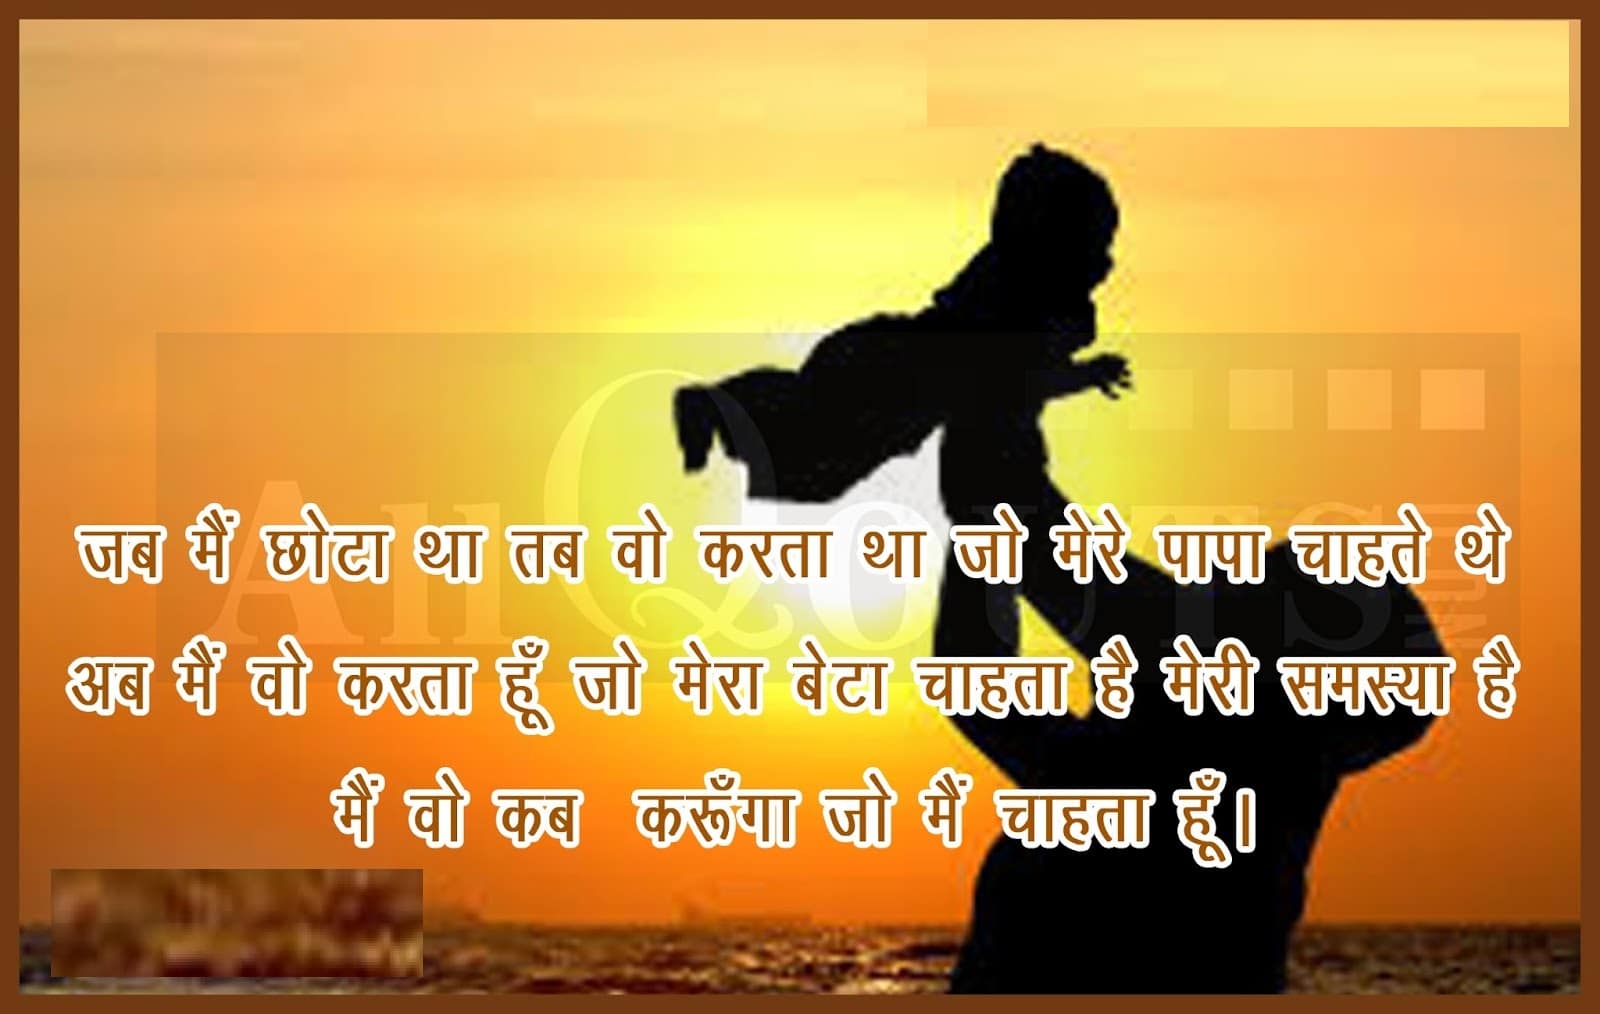 fathers-day-quotes-and-poem-in-hindi-oppidan-library